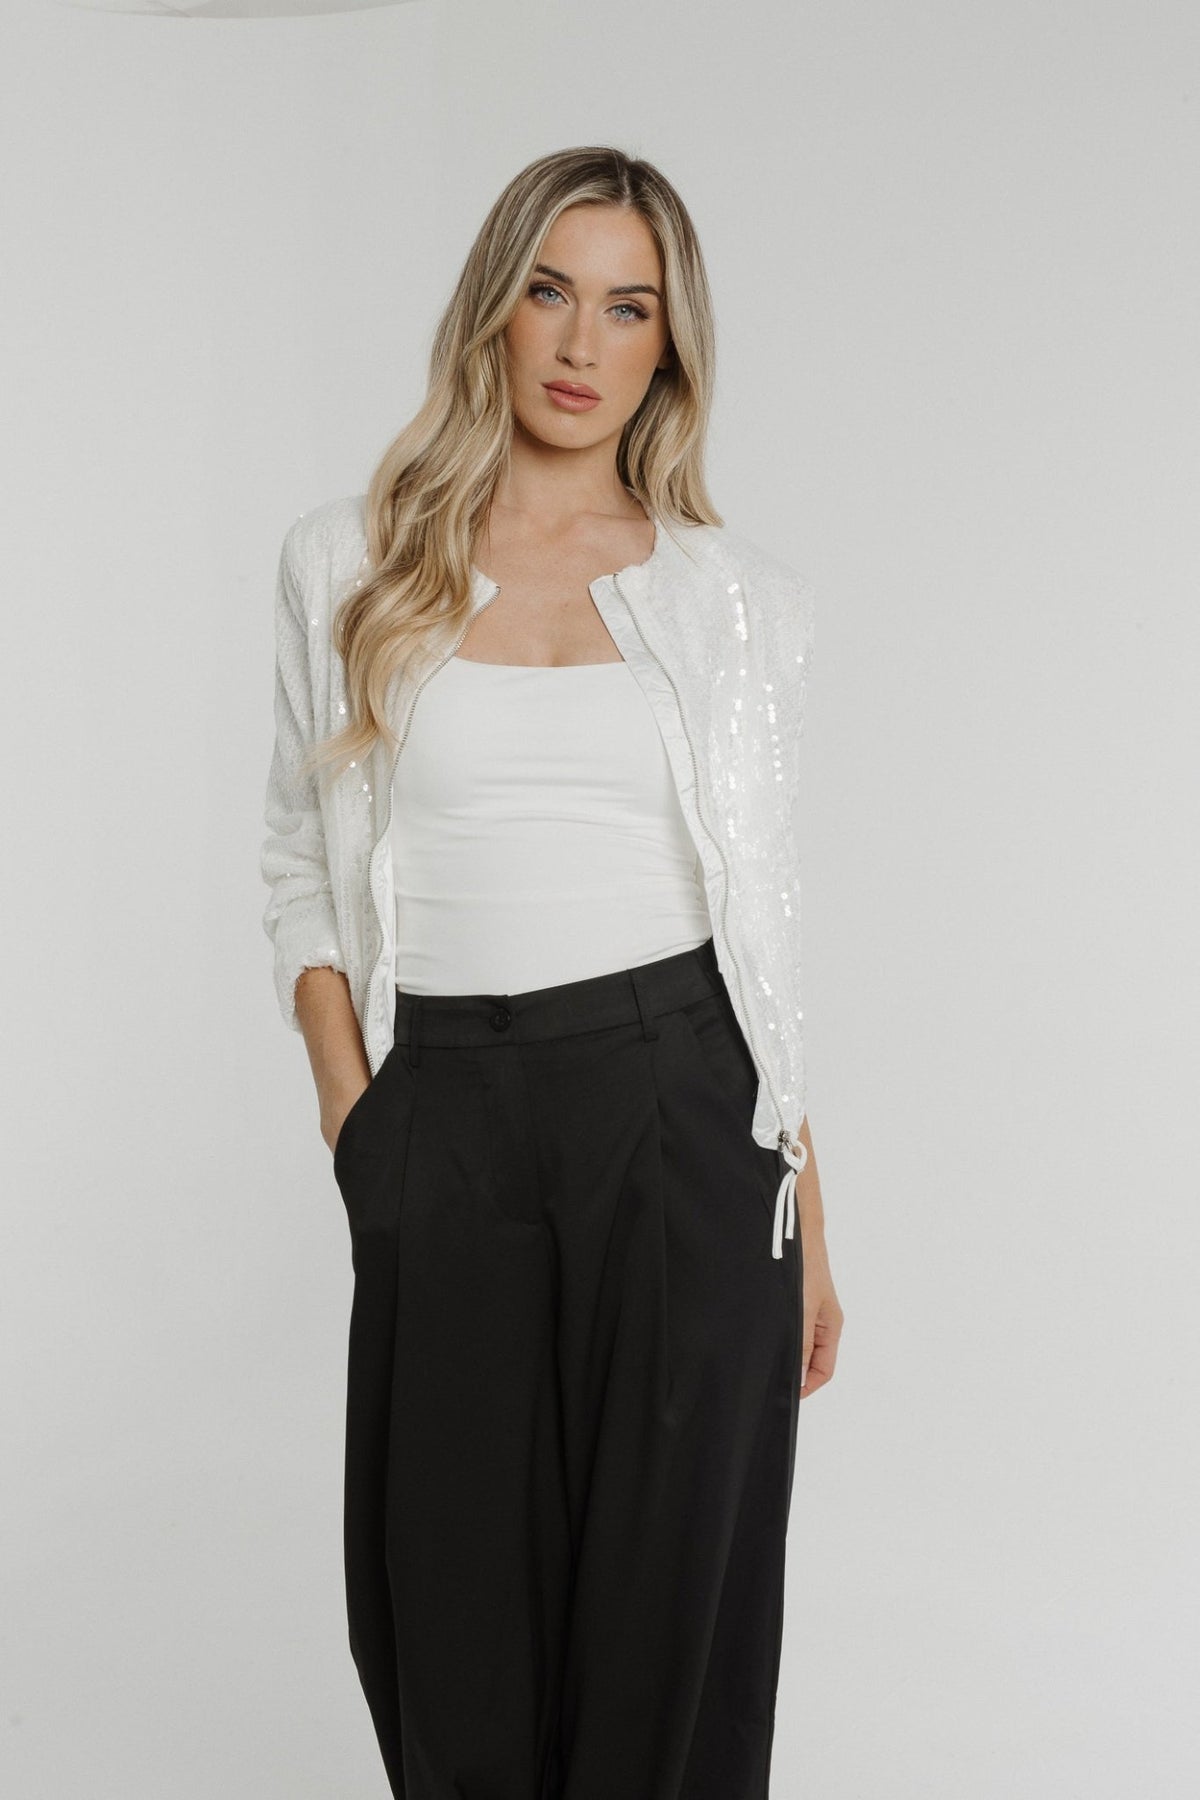 Holly Sequin Jacket In White - The Walk in Wardrobe